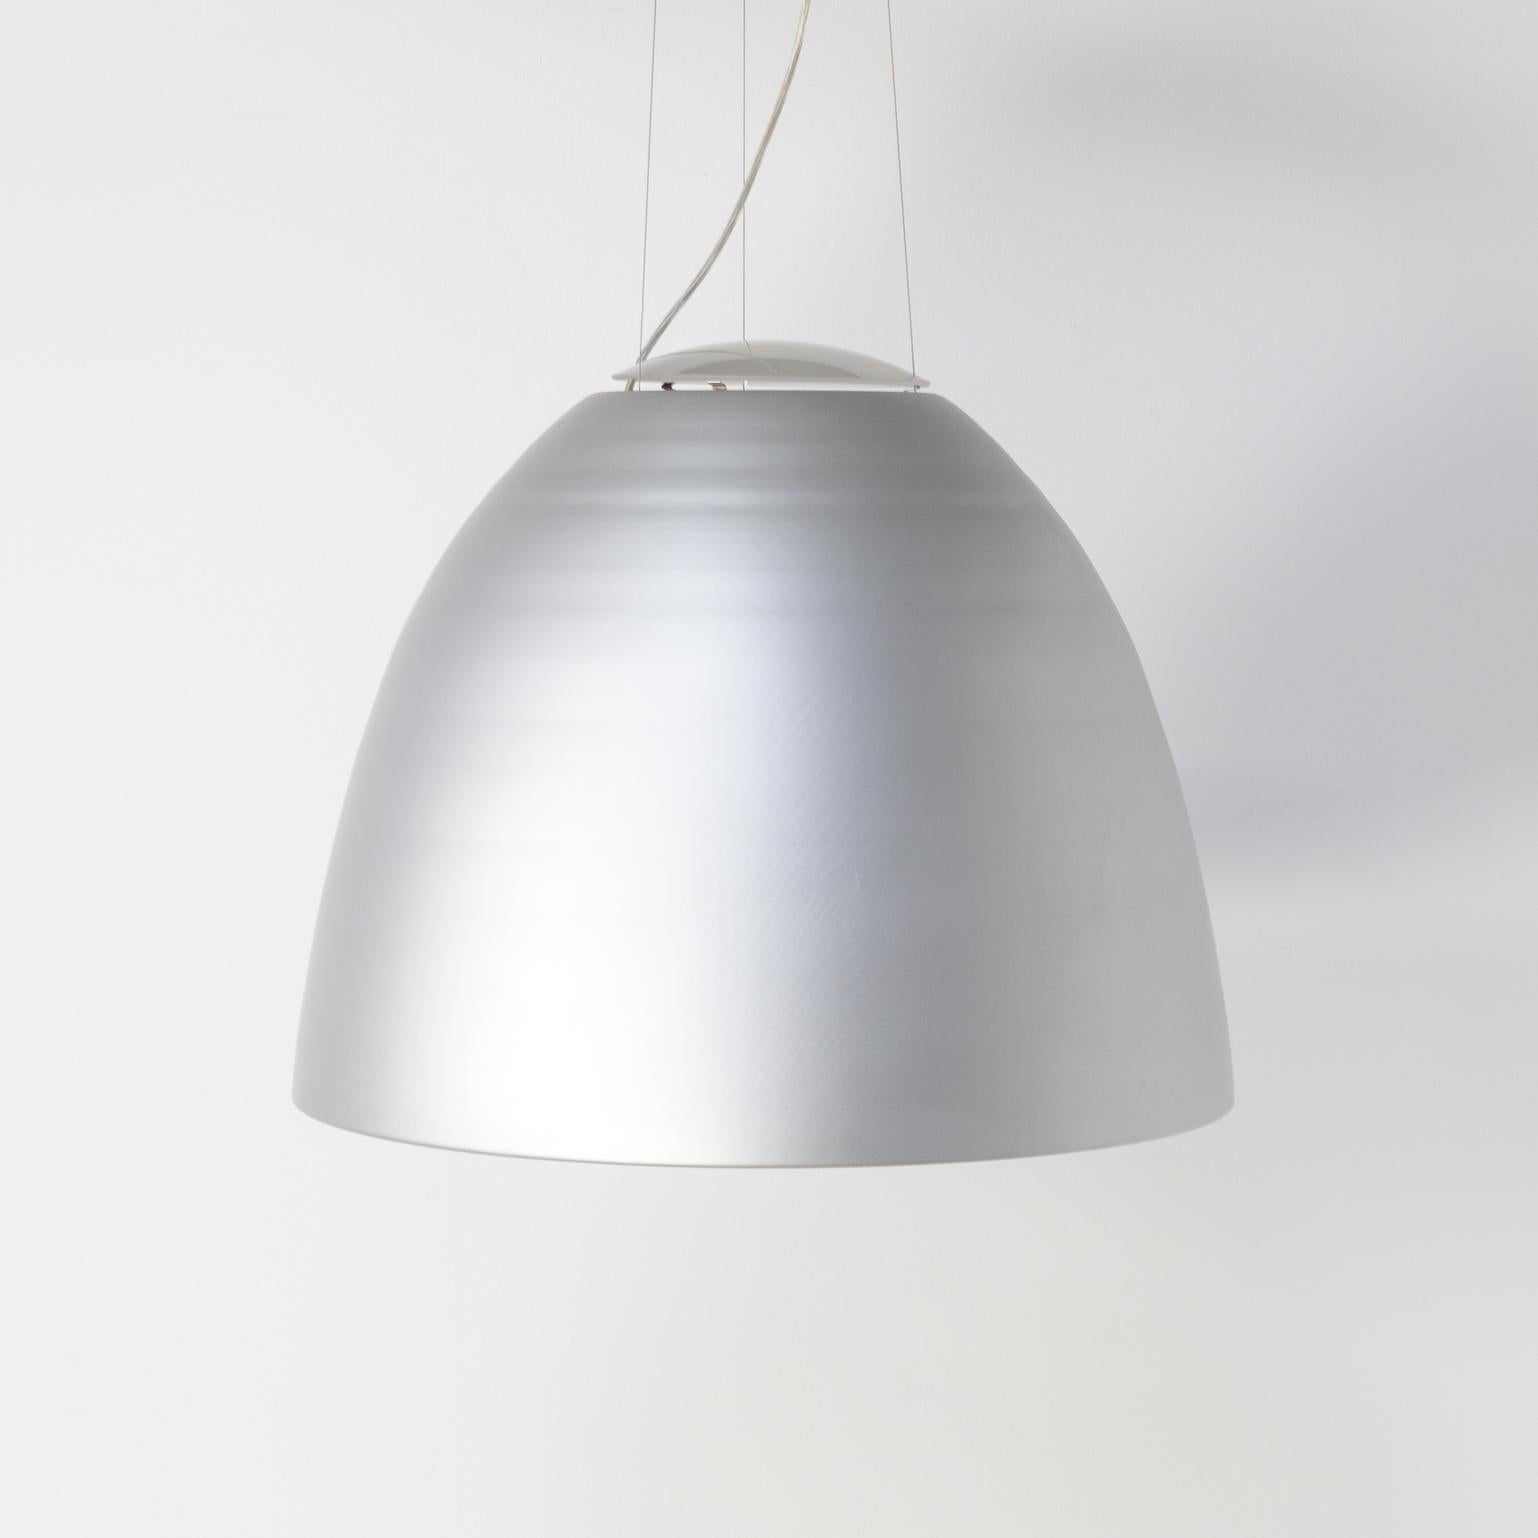 Nur hanging lamp is a design by Ernesto Gismondi and manufactured by Artemide. The hanging lamp provides light in a stylish way. It not only shines light downwards but also light upwards, which creates a kind of circle on the ceiling. Mood lighting,